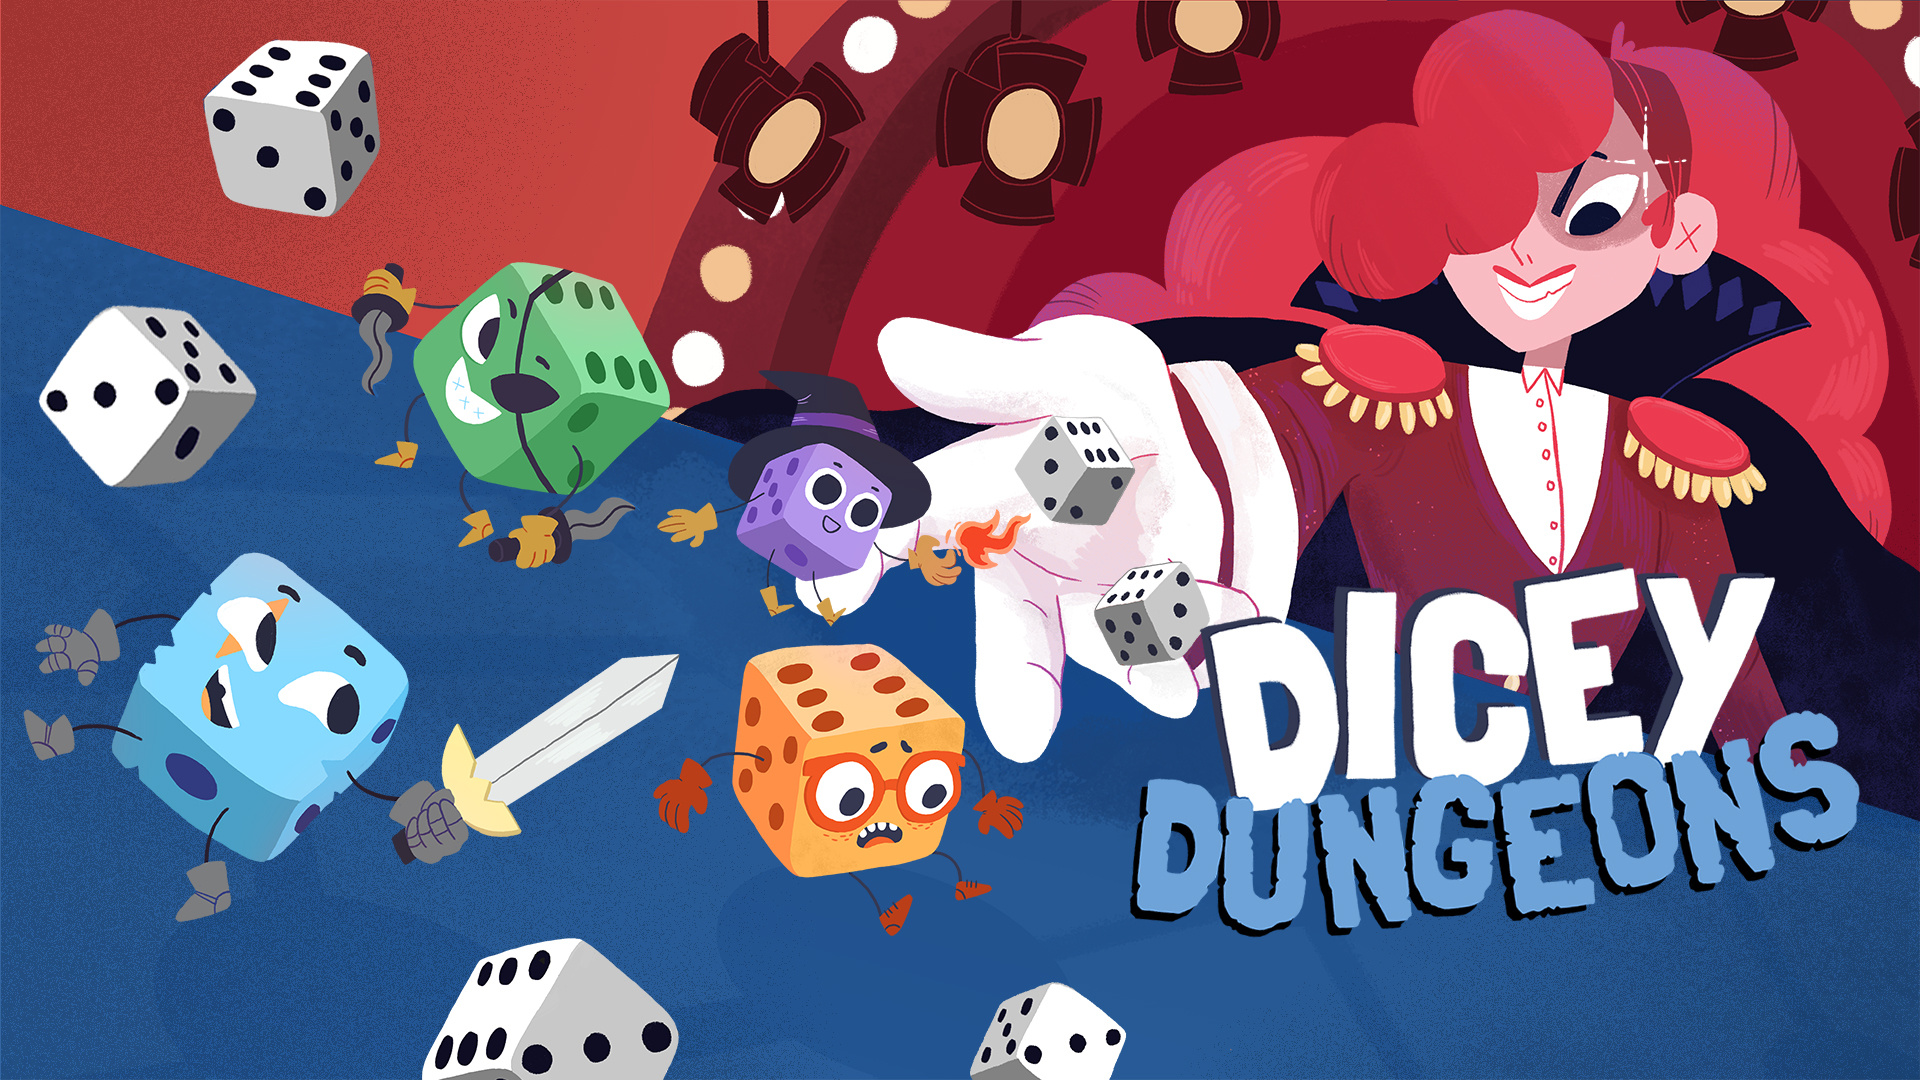 roguelike video games - Dicey Dungeons video game screenshot